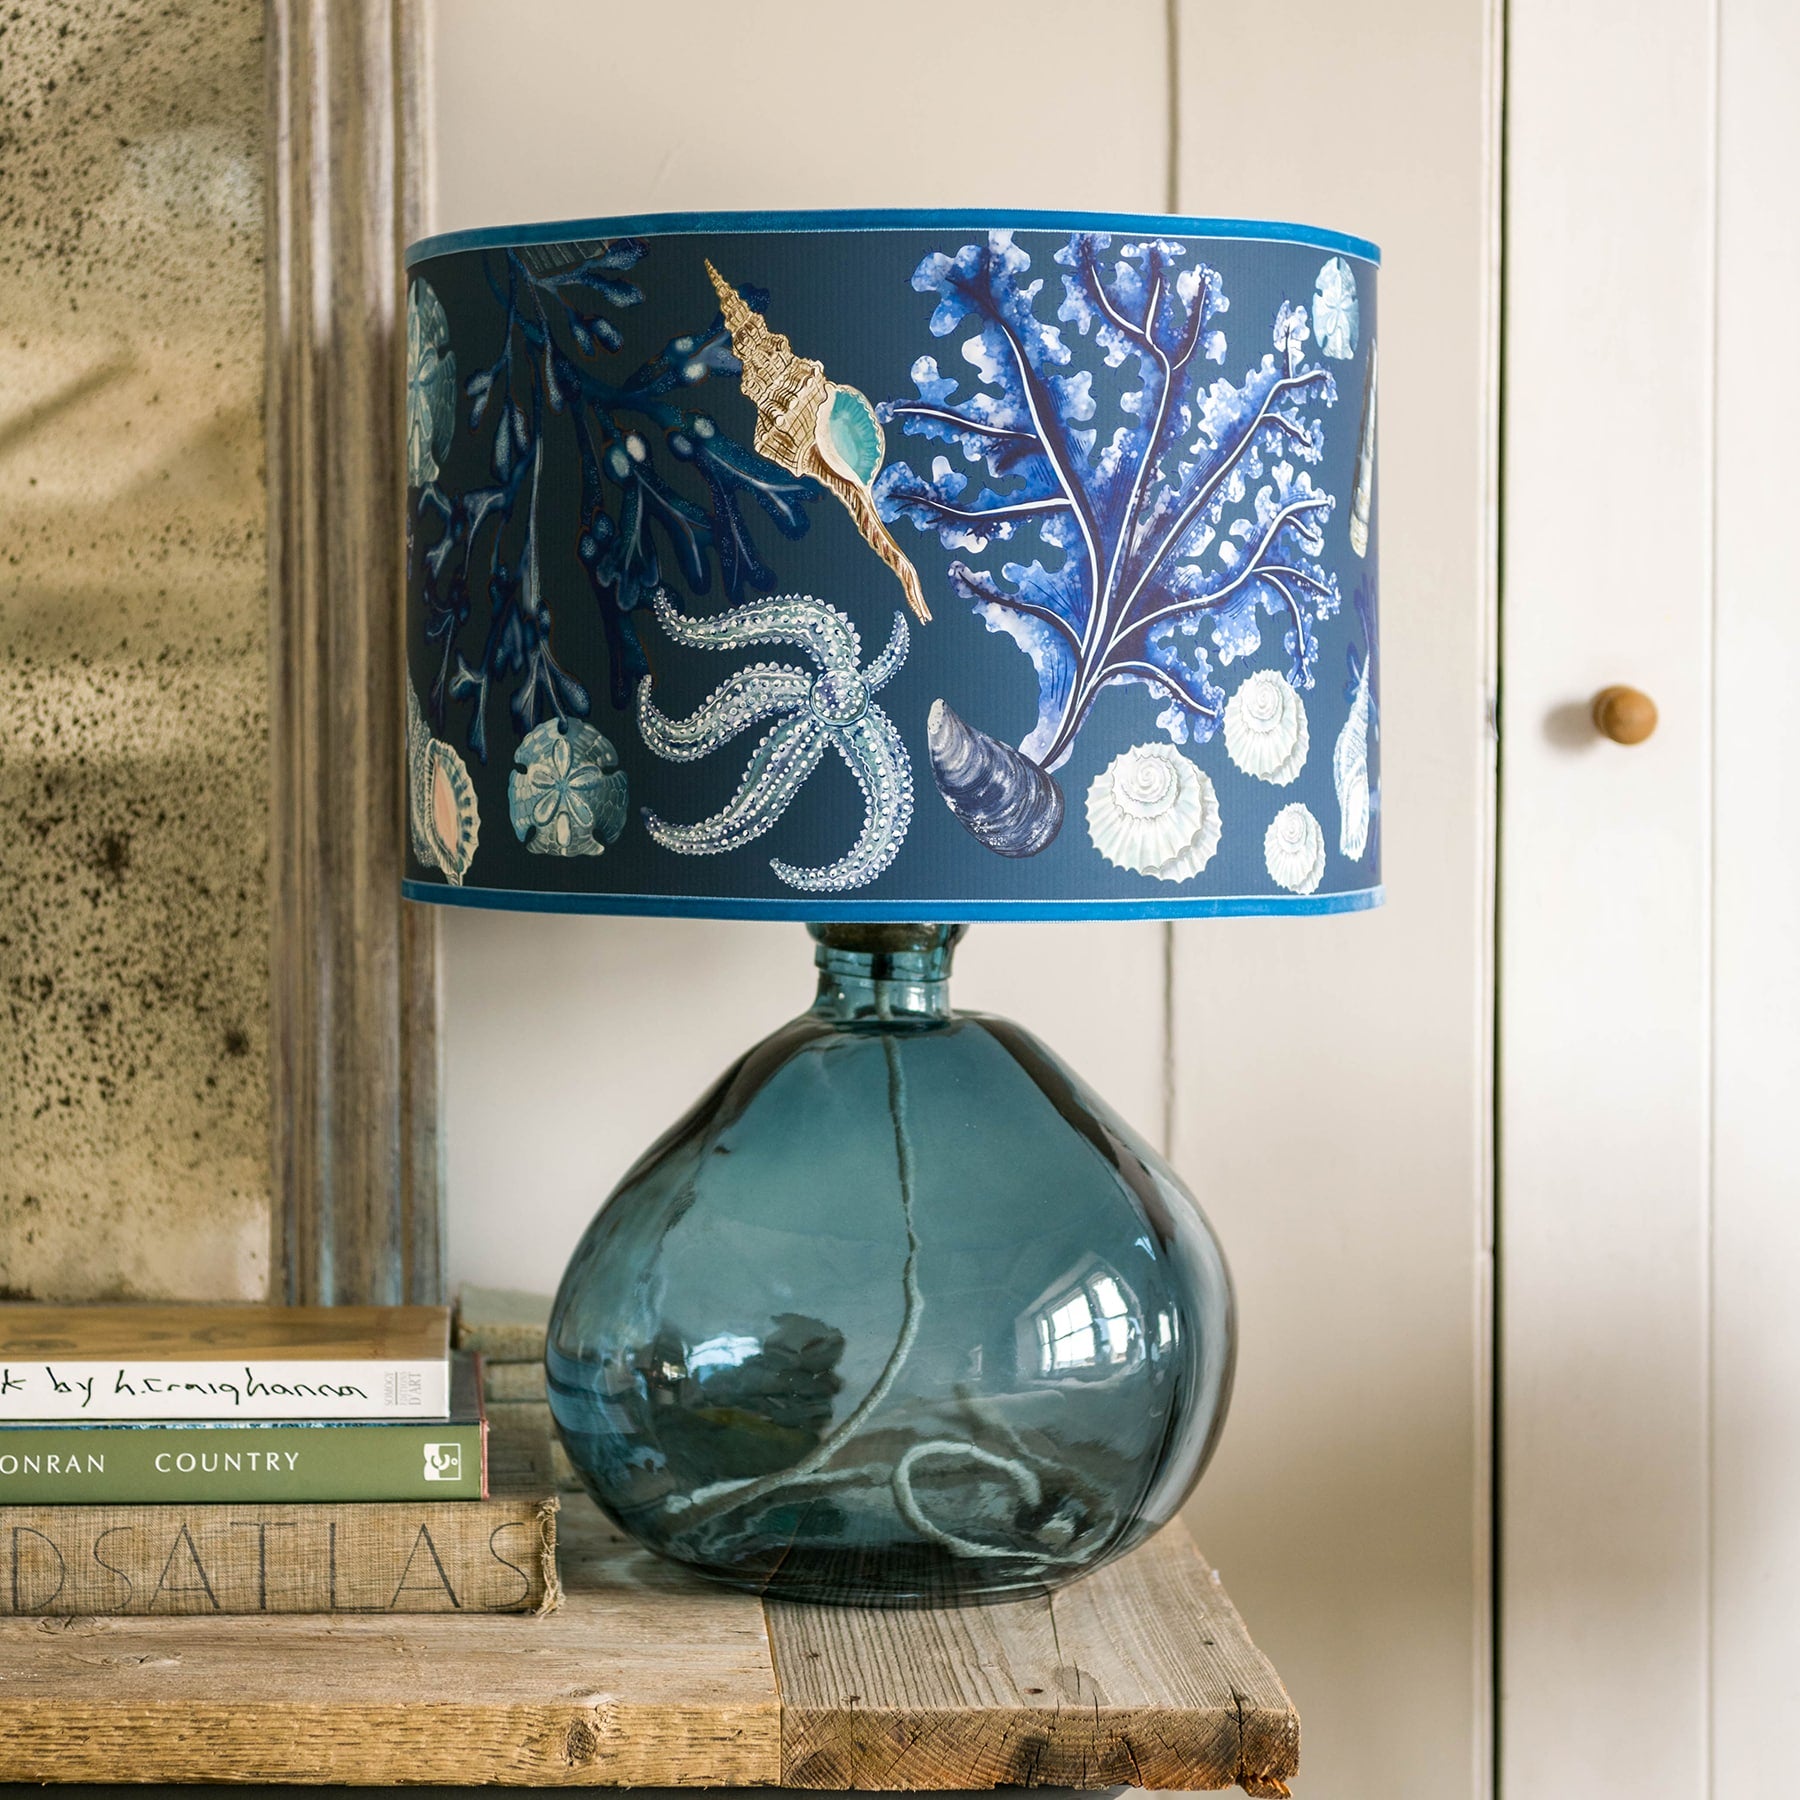 Rockpool Navy Shade With Shells,Seaweed,Sand dollars and Starfish Design in blues/browns with a blue trim on the edge of the shade on a glass lampbase.Its is placed on table next to a pile of books